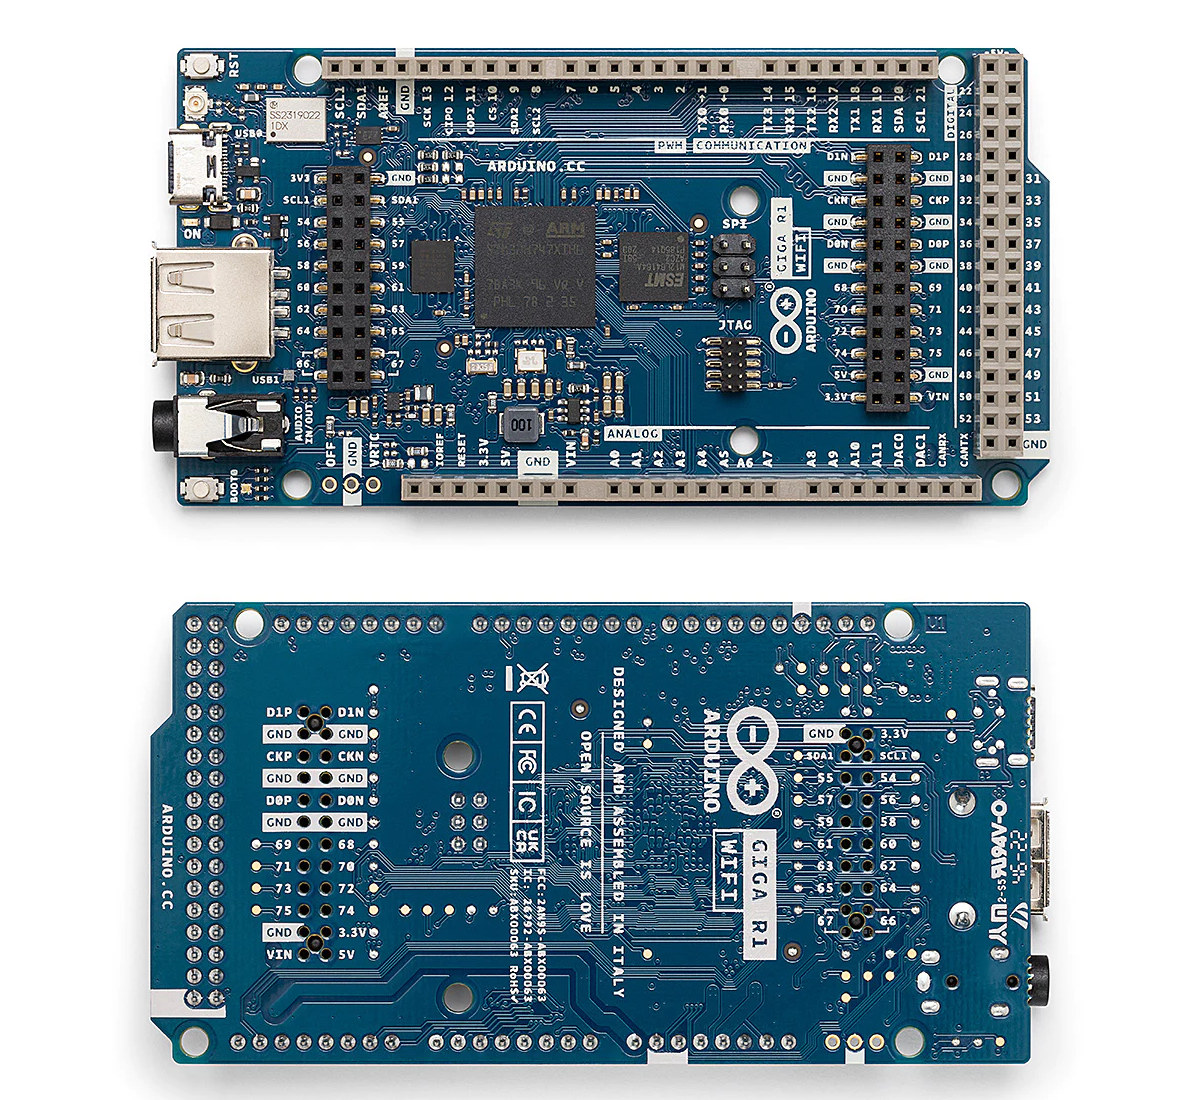 Arduino GIGA R1 WiFi board launches with STM32H7 MCU, up to 76 I/O pins -  CNX Software